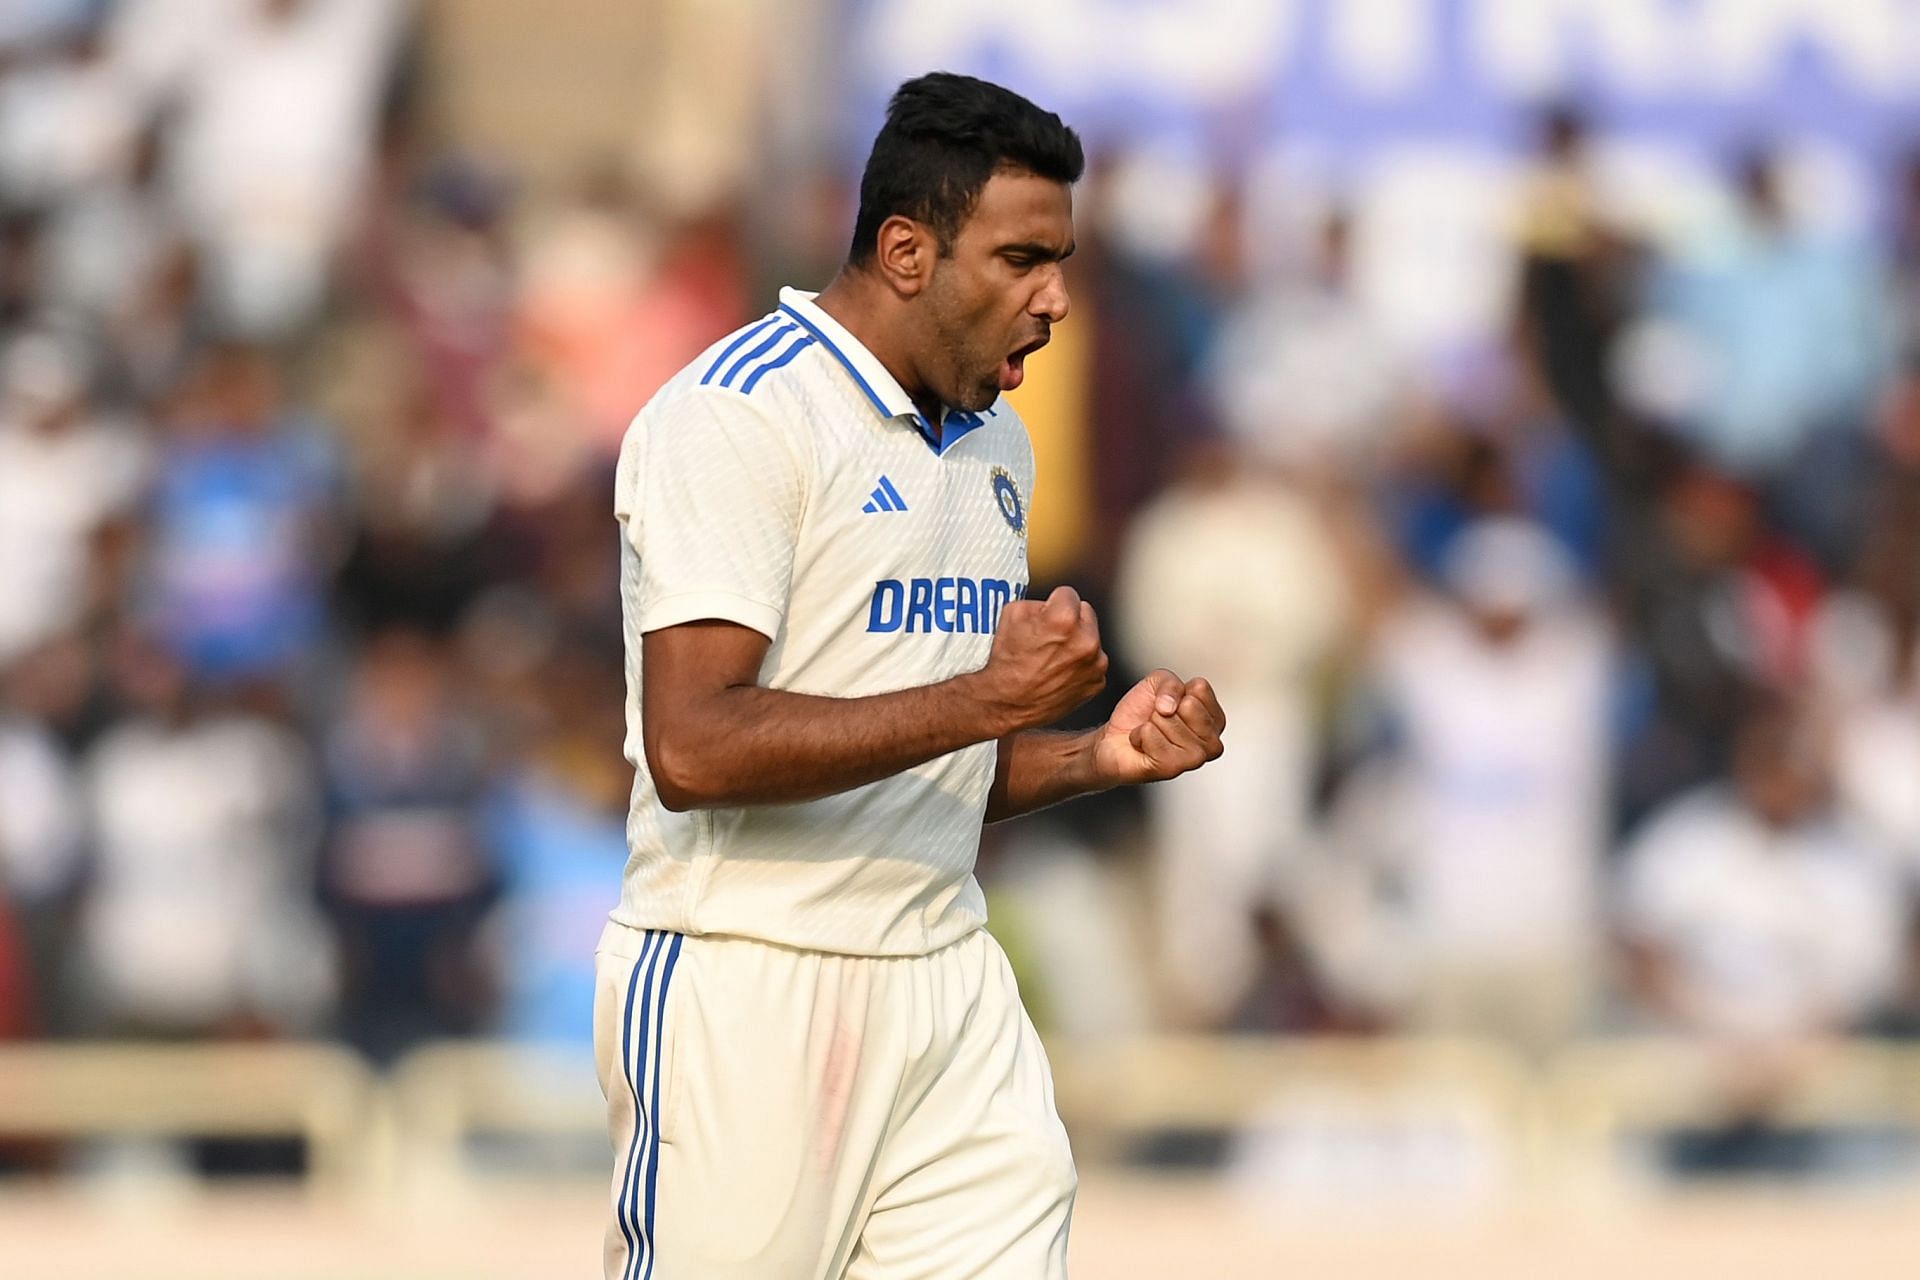 5 Indian bowlers with most wickets in international cricket ft. Ravichandran Ashwin